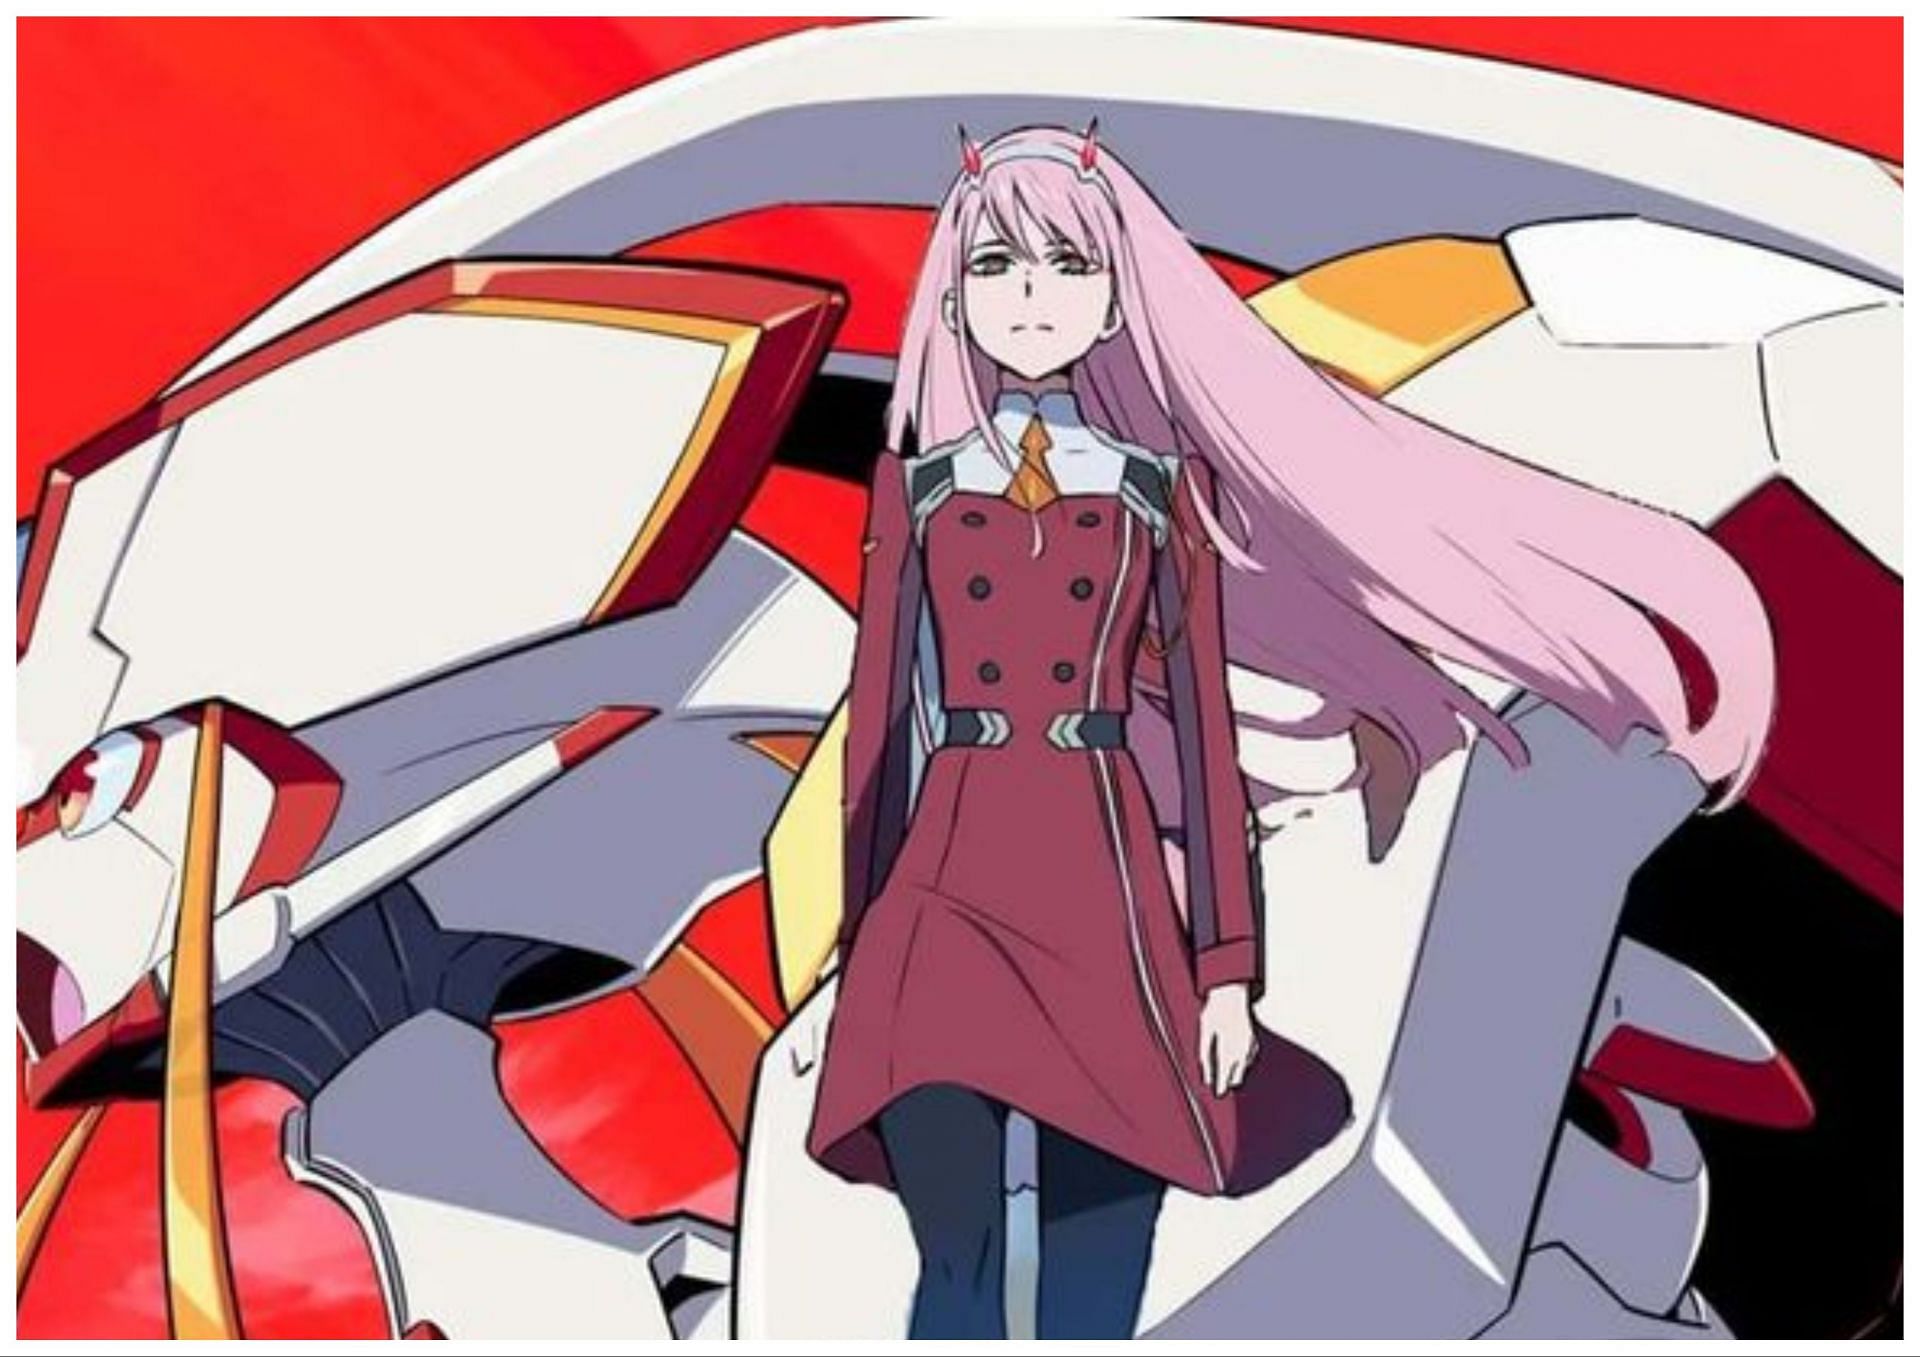 Why is Darling in the Franxx considered a bad anime? Explained